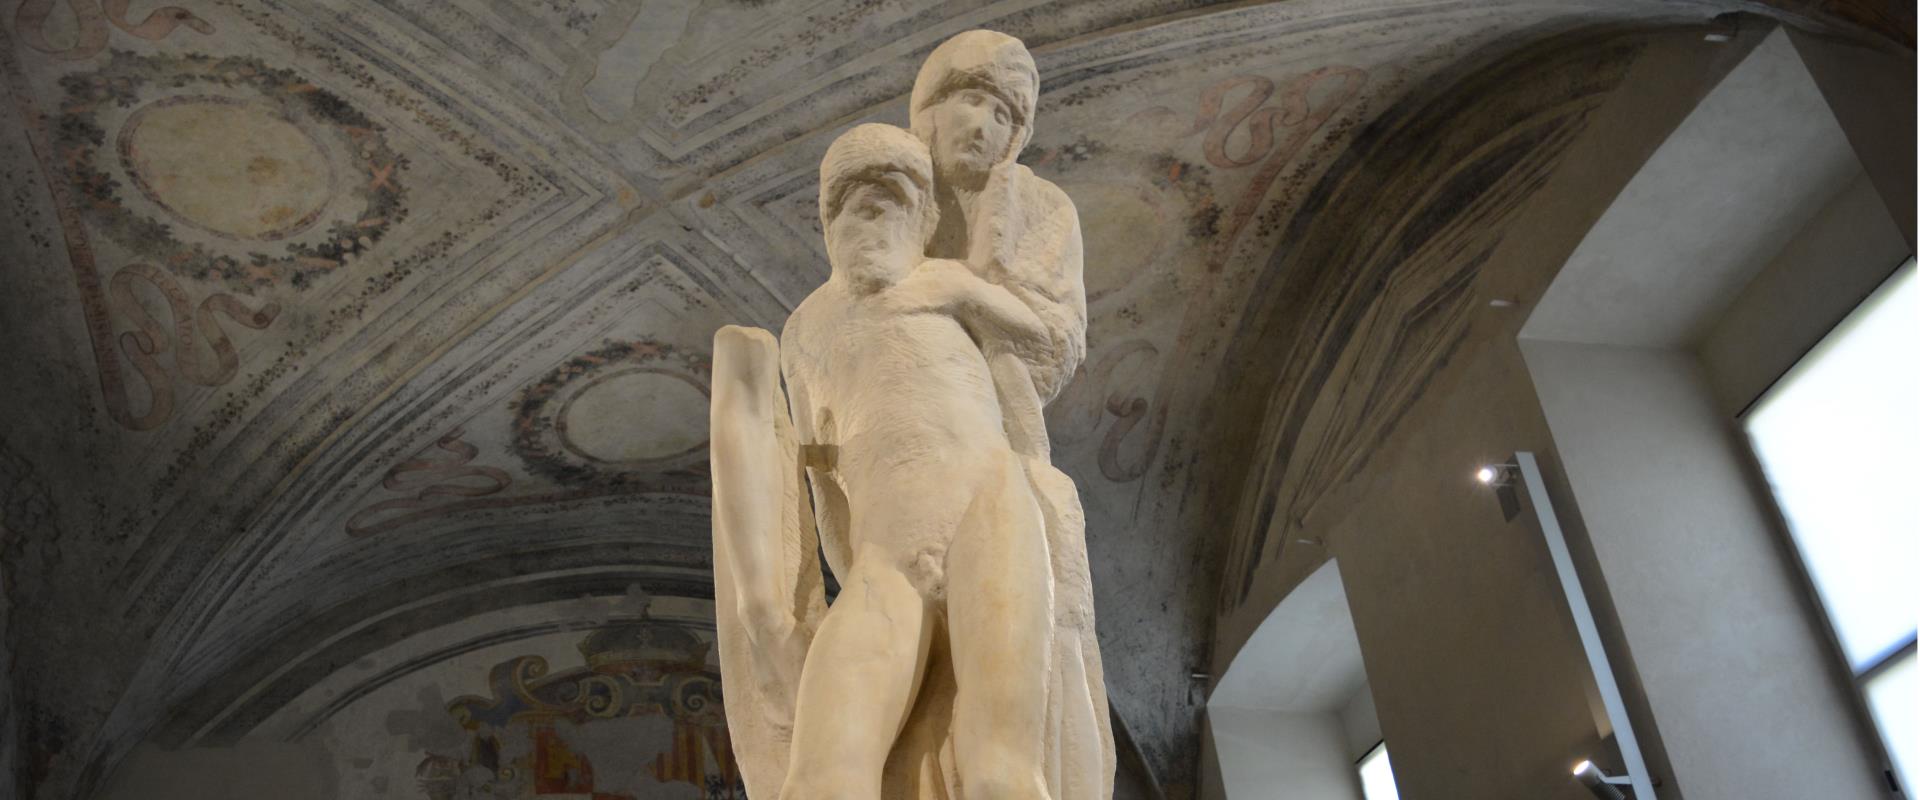 Discover the Pietà Rondanini, Michelangelo''s last unfinished masterpiece at the Sforzesco Castle. Visit Milan and stay at Best Western Hotel City near the city''s top tourist attractions.